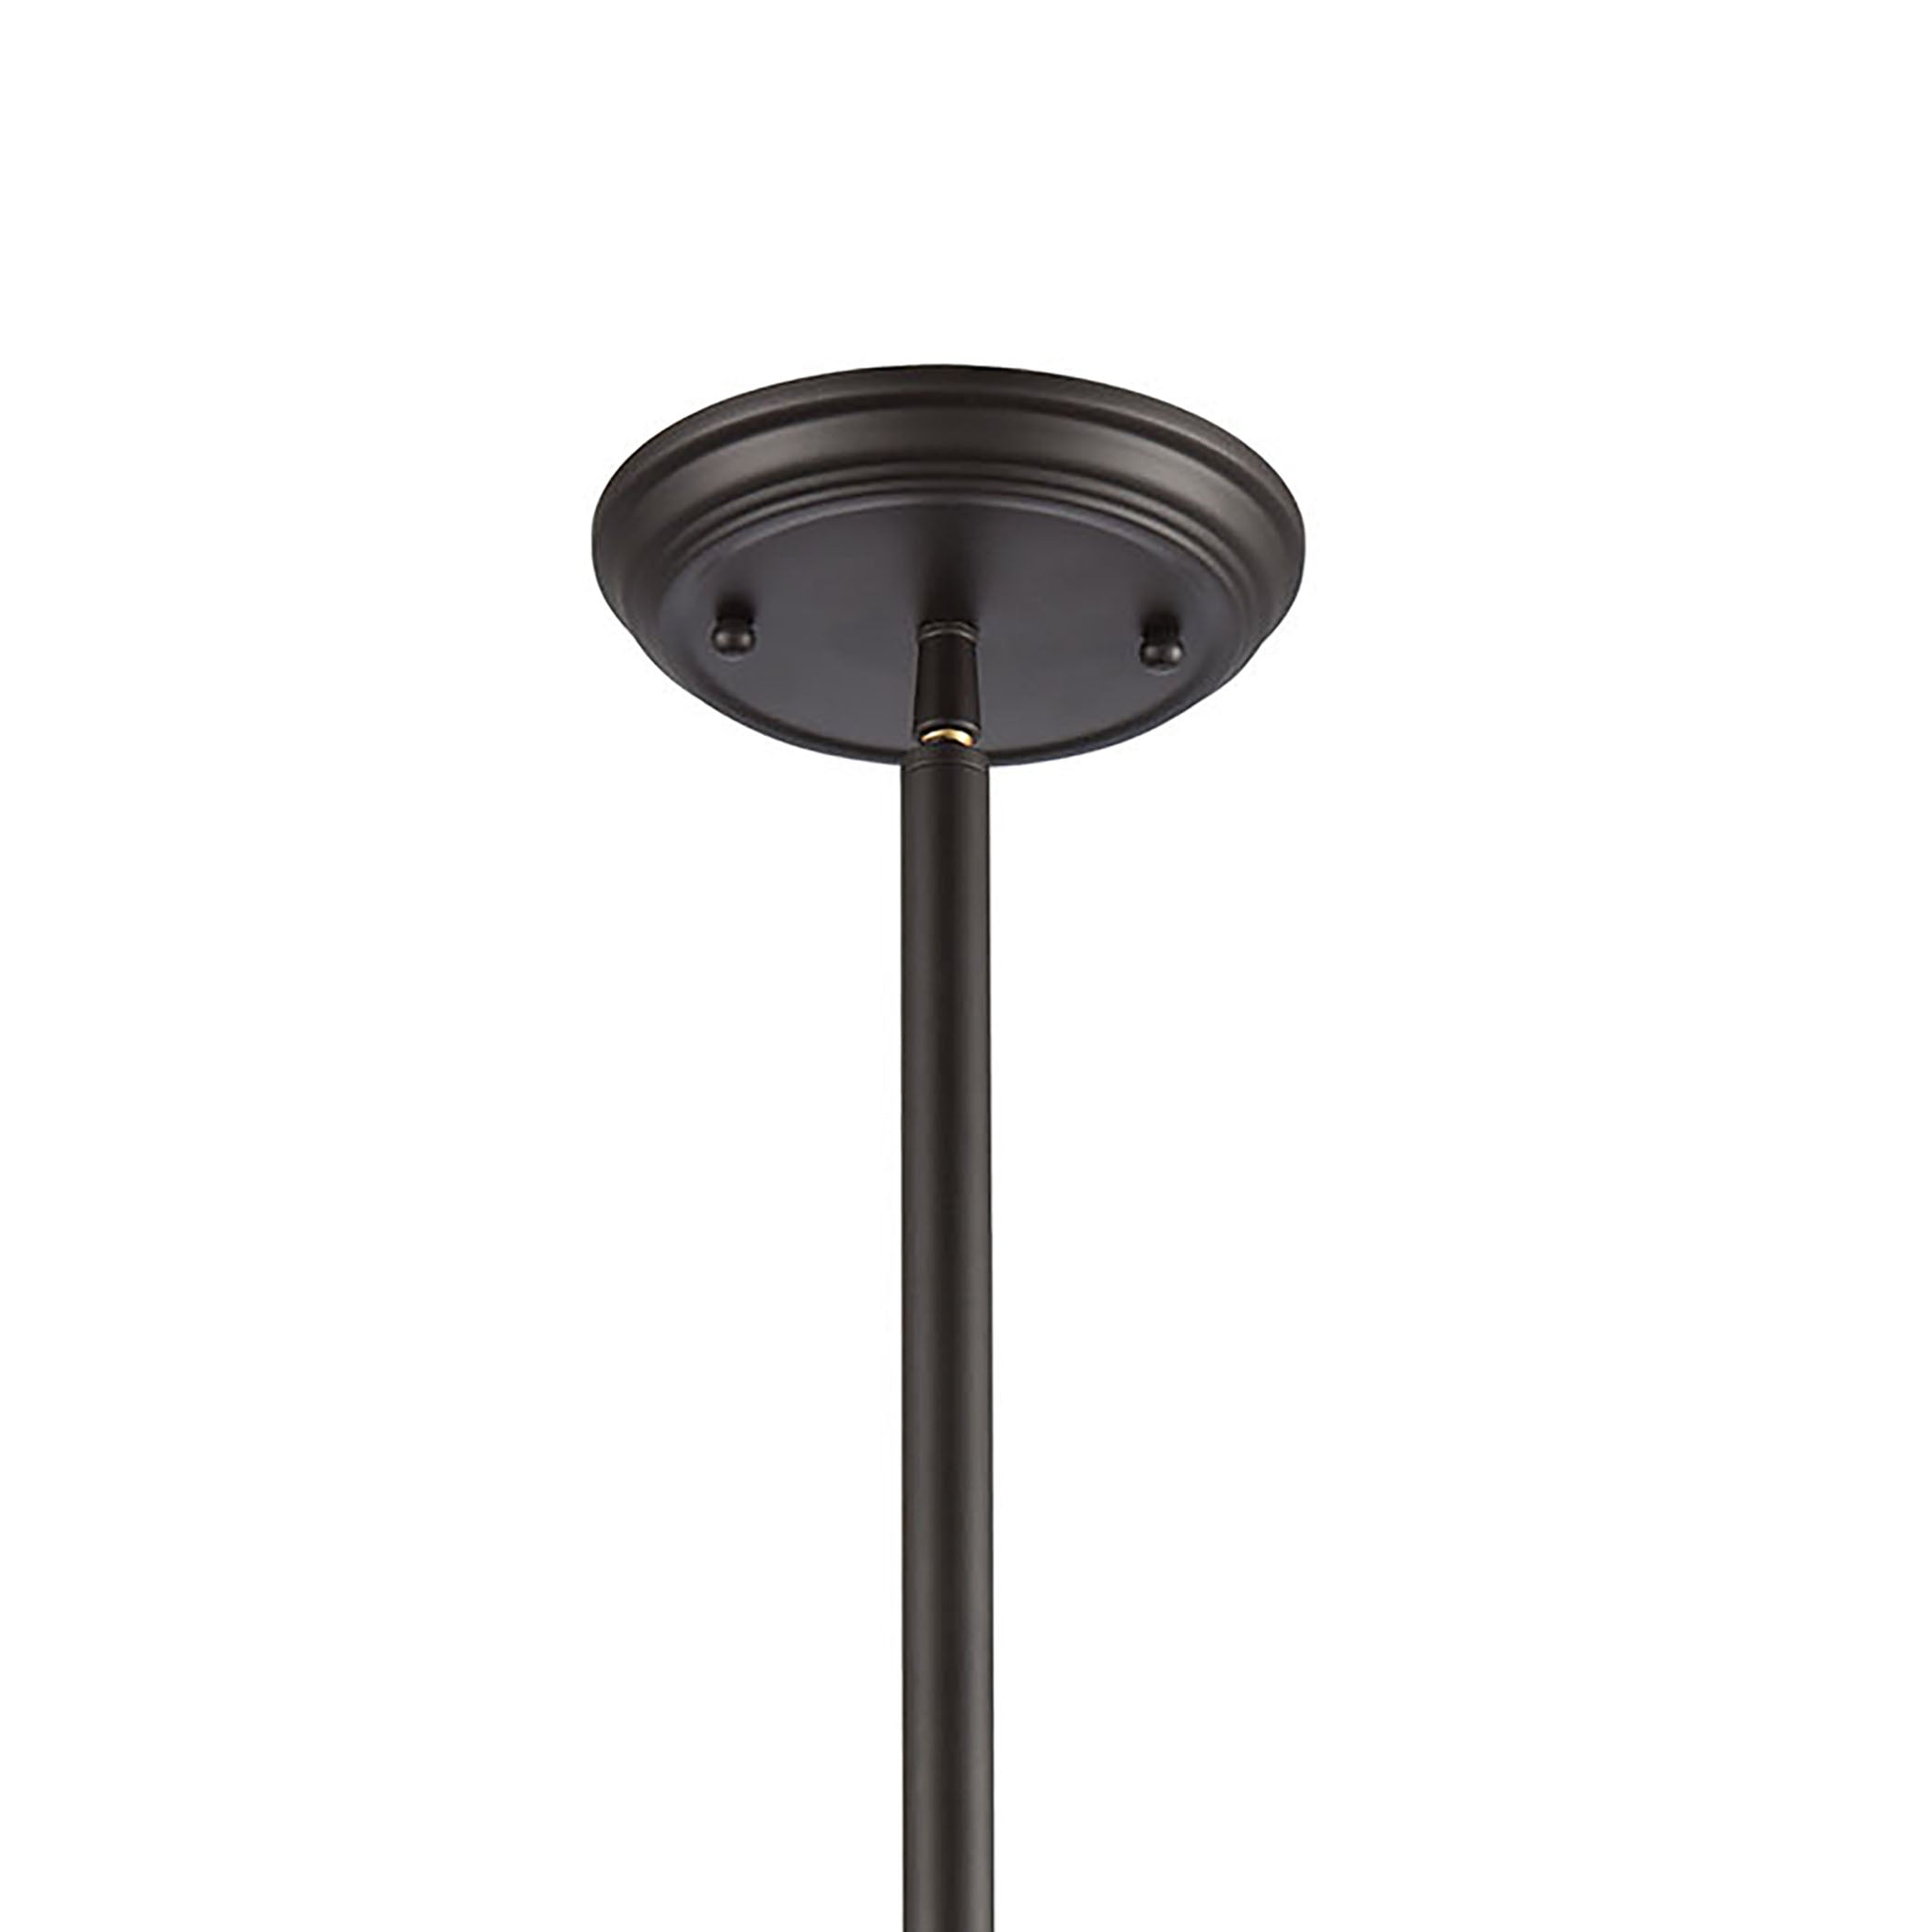 ELK Lighting 66618-1 Chadwick 1-Light Pendant in Oil Rubbed Bronze with Metal and Frosted Glass